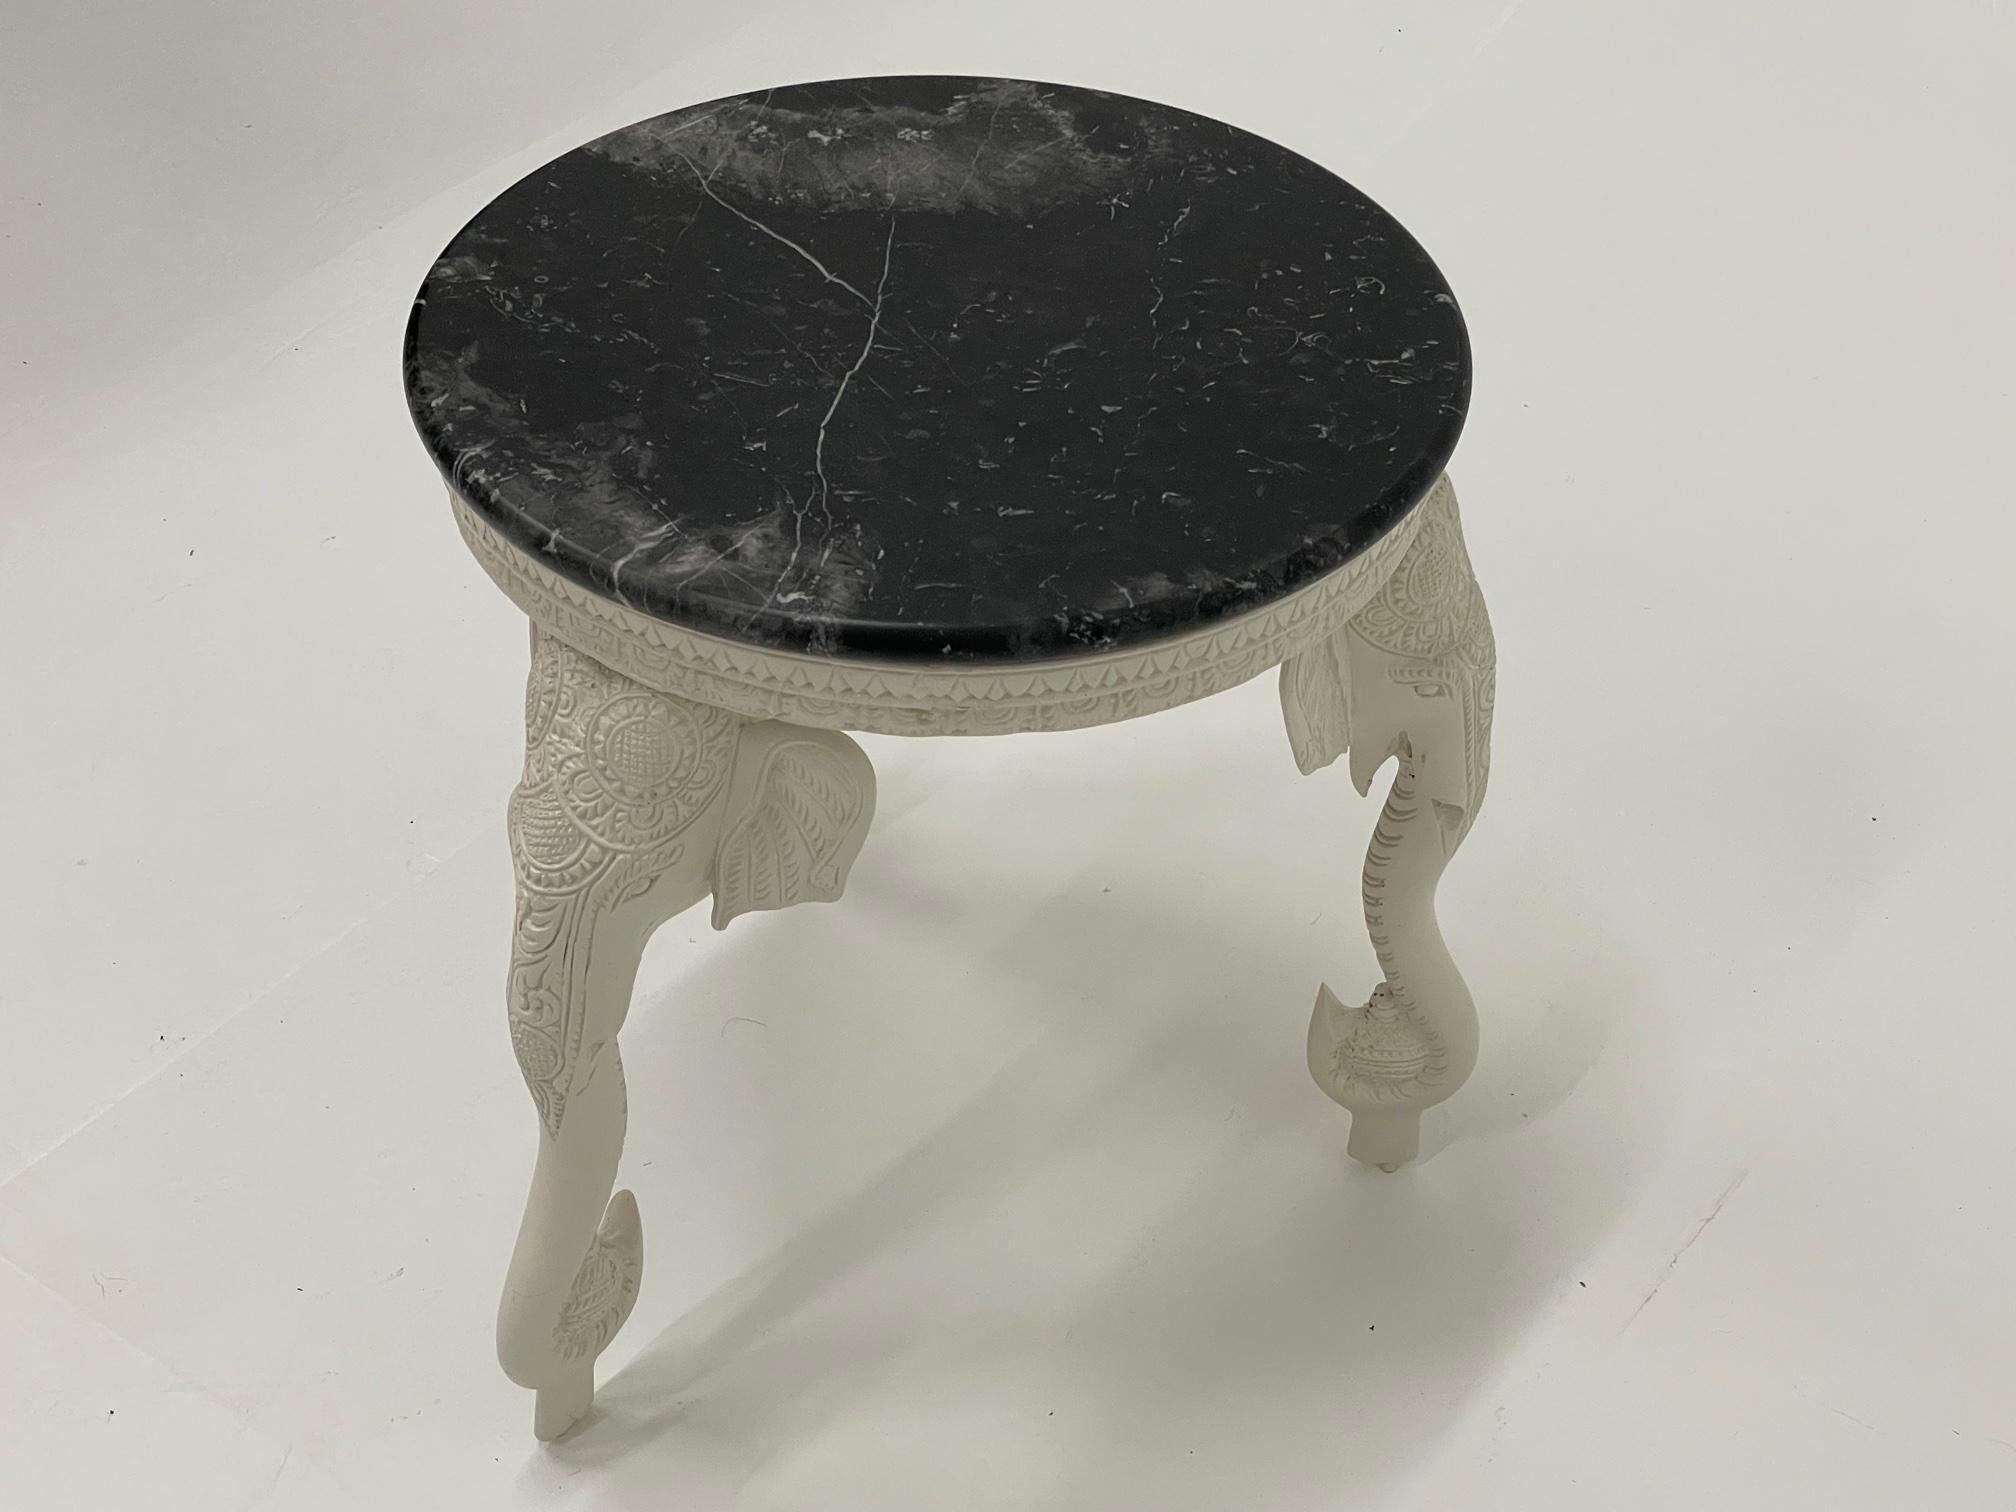 Chic round side table having meticulously detailed cream colored resin base with 3 elephant heads terminating in cleverly designed legs that are the elephants' curling trunks. A contrasting black marble top has some cream and grey veining.